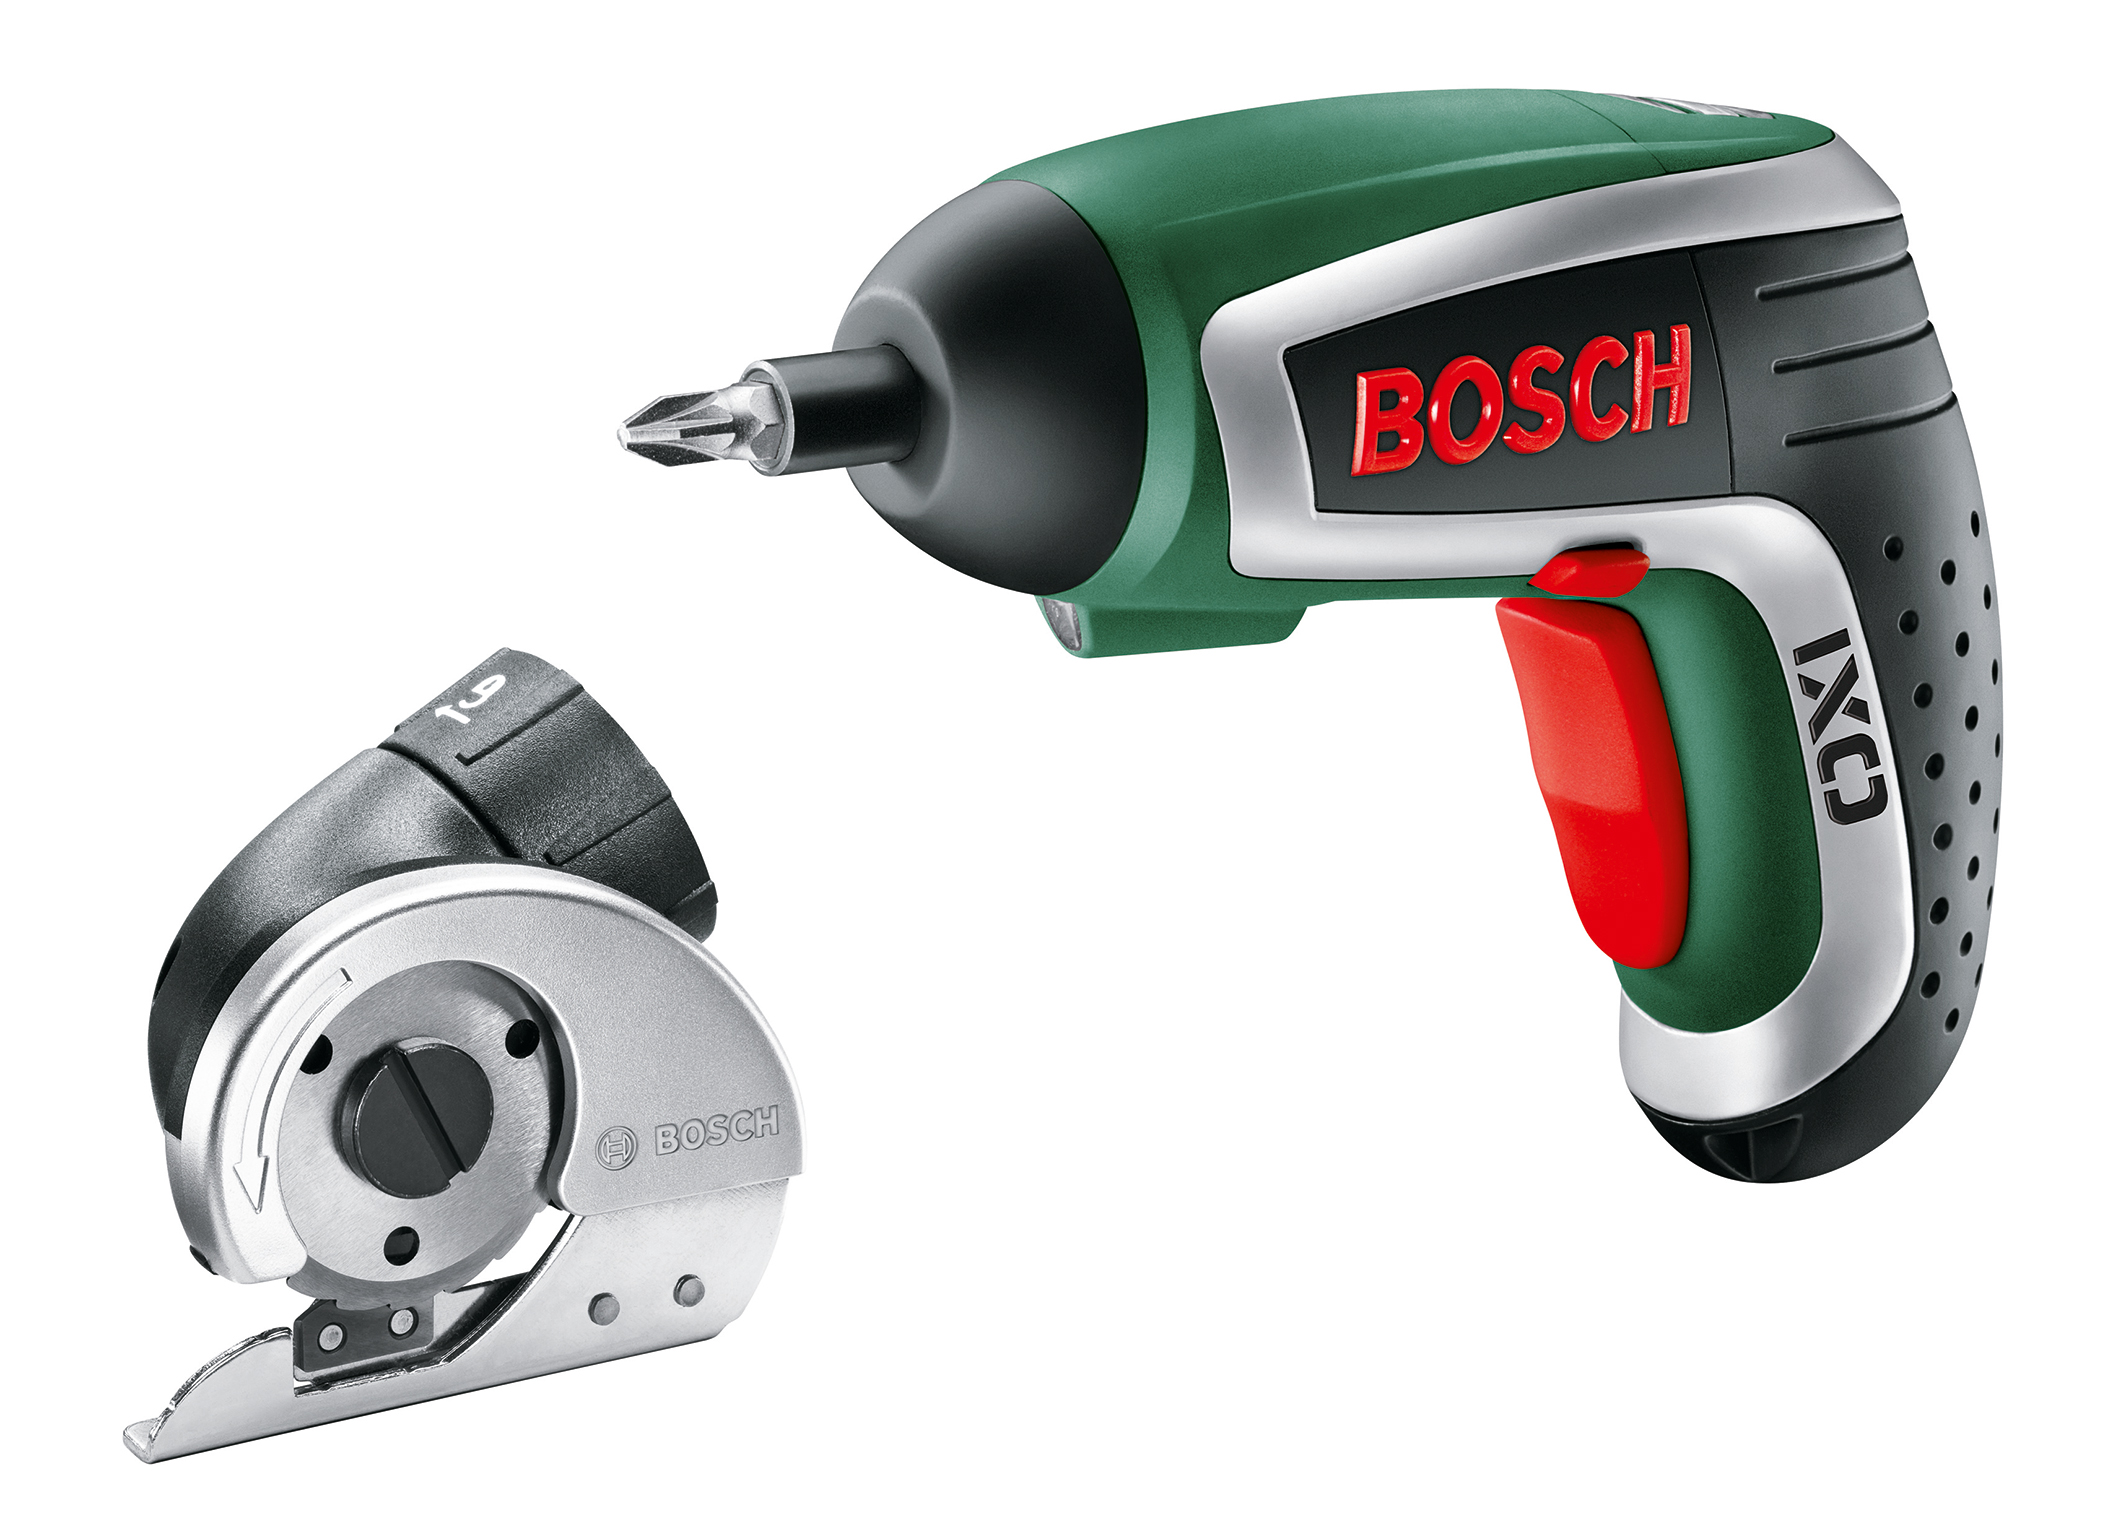 The Ixo Collection from Bosch - Bosch Media Service